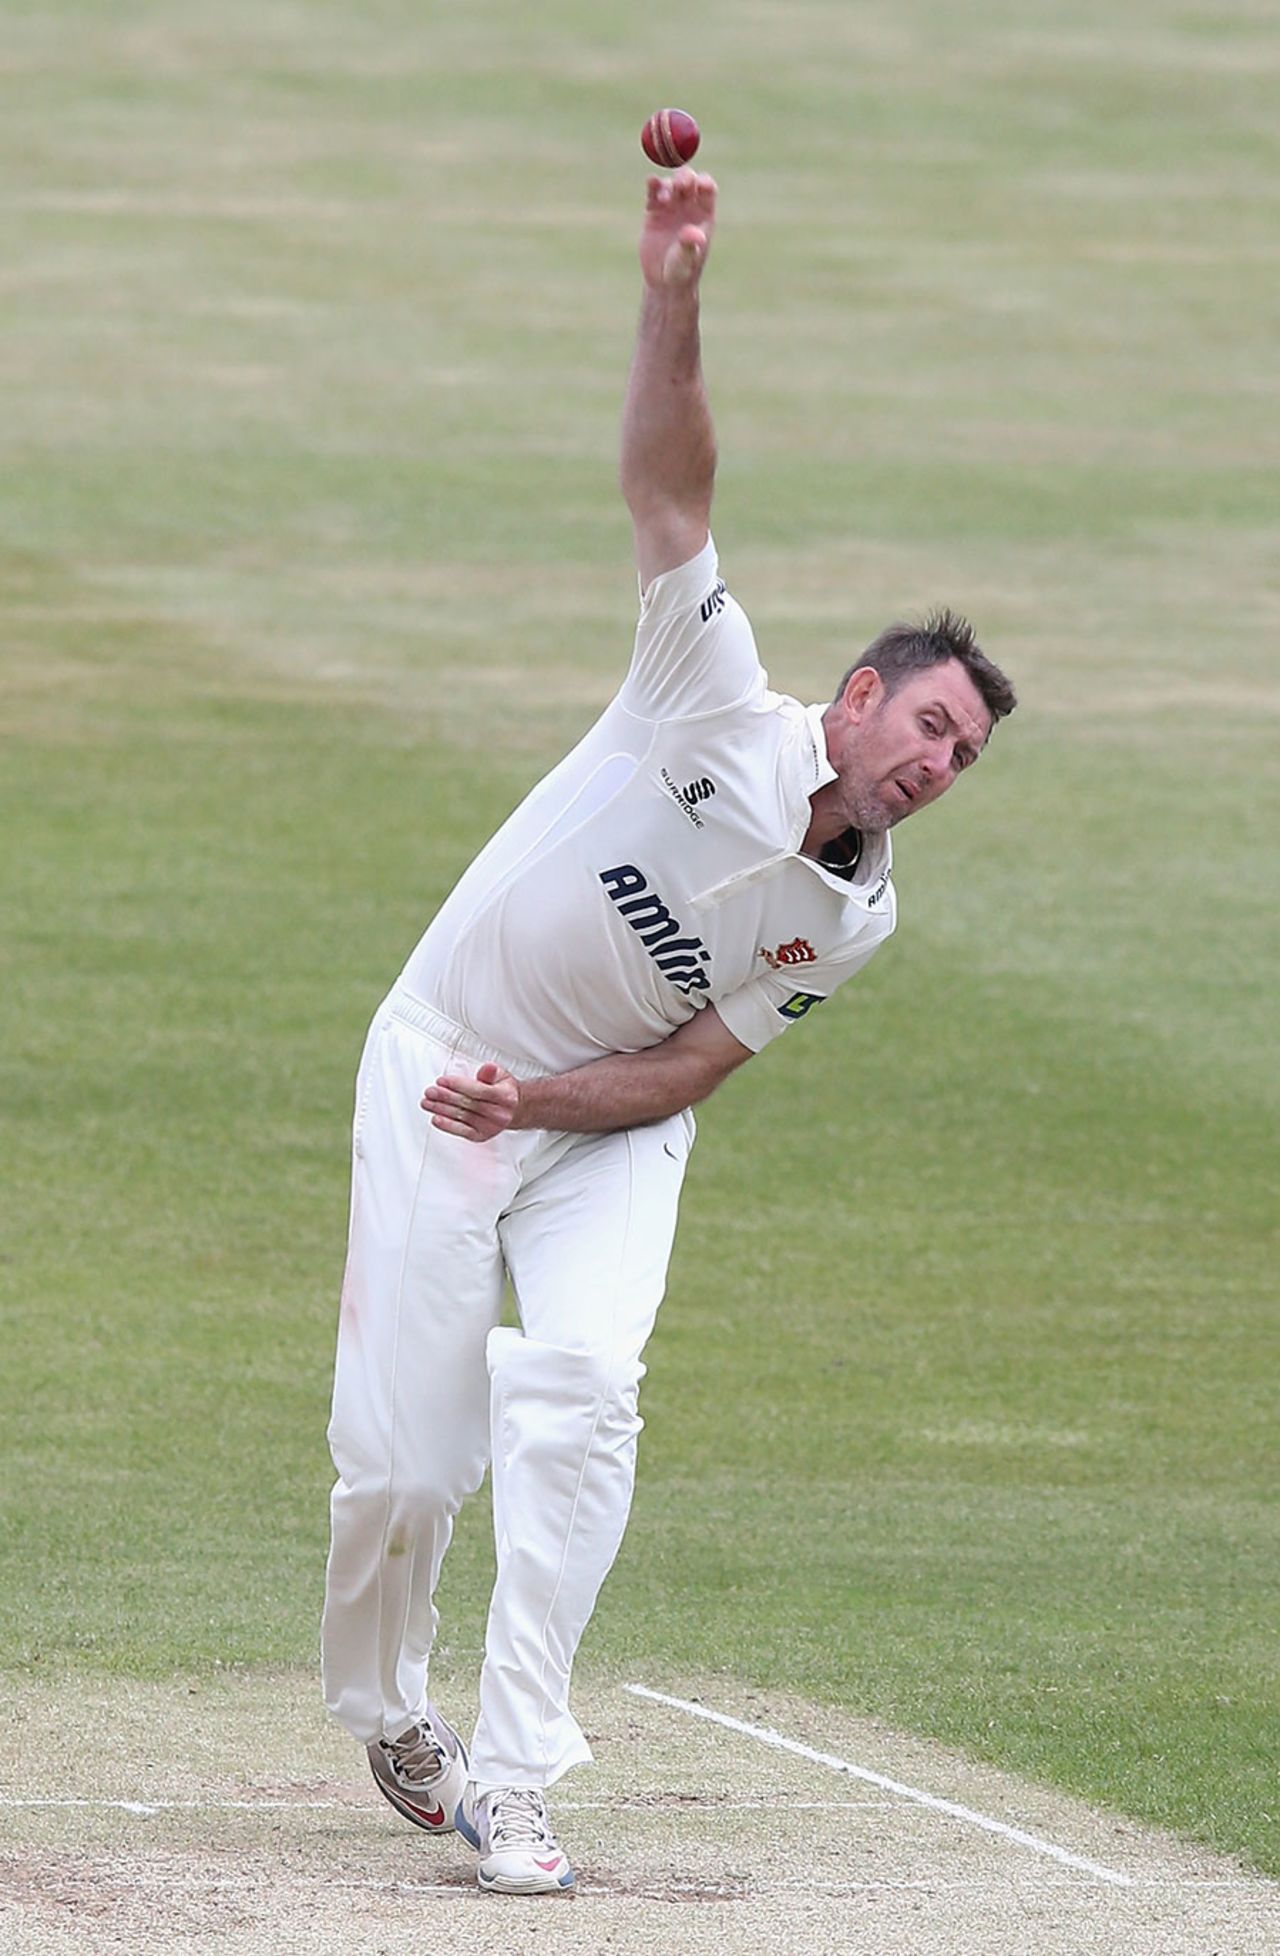 David Masters took the opening wicket, Northamptonshire v Essex, County Championship Division Two, Wantage Rd, 2nd day, June 8, 2015